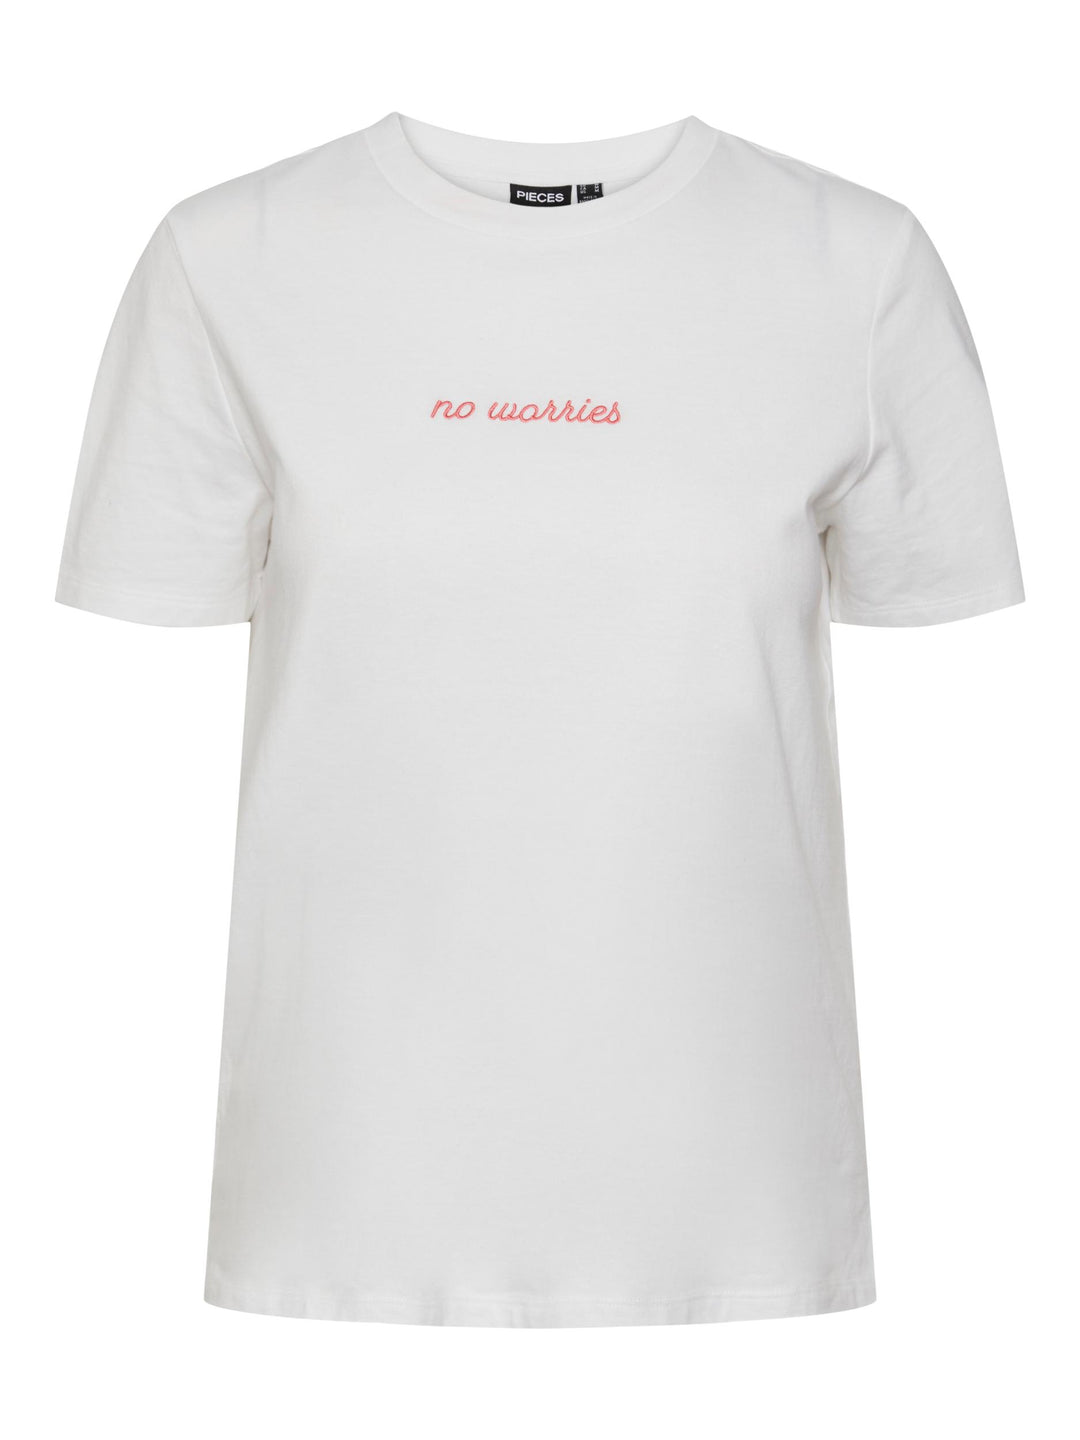 Fria Embroidered T-Shirt - No Worries